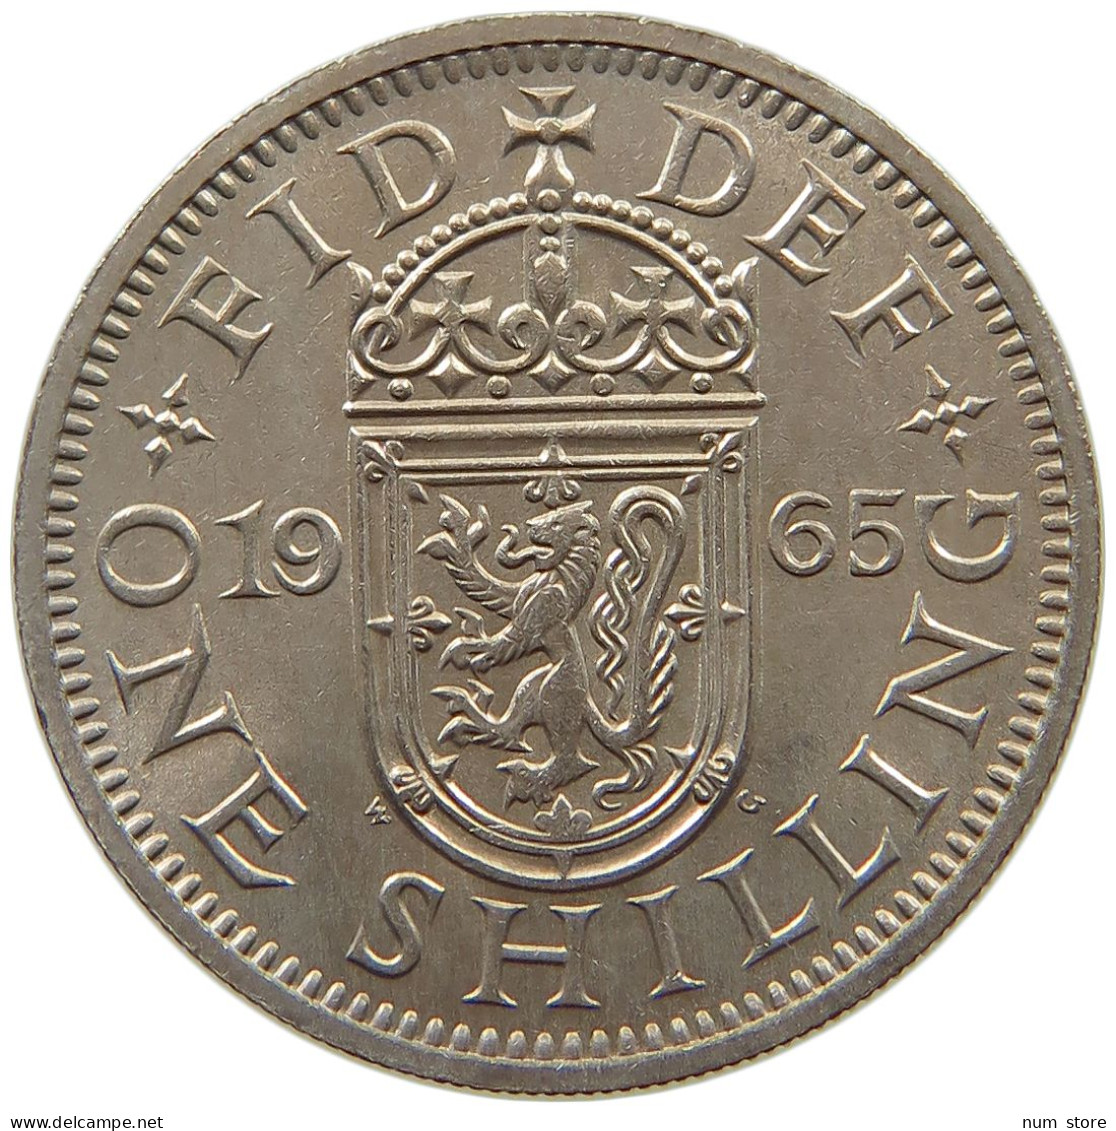 GREAT BRITAIN SHILLING 1965 TOP #s064 0437 - I. 1 Shilling